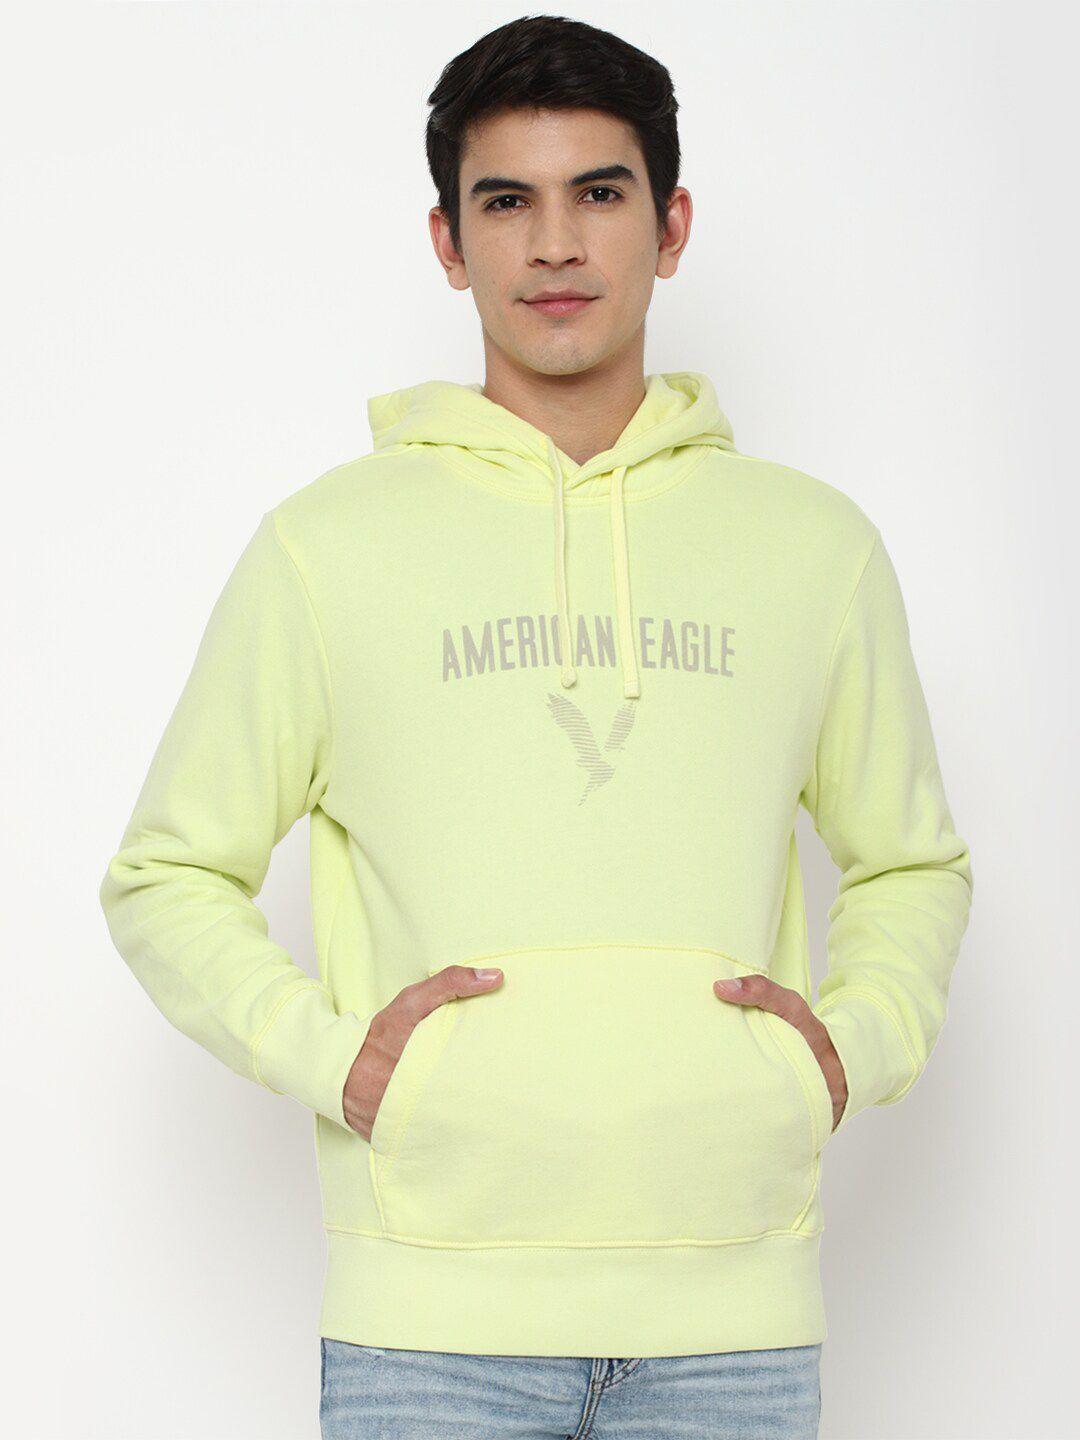 american eagle outfitters men yellow printed hooded sweatshirt